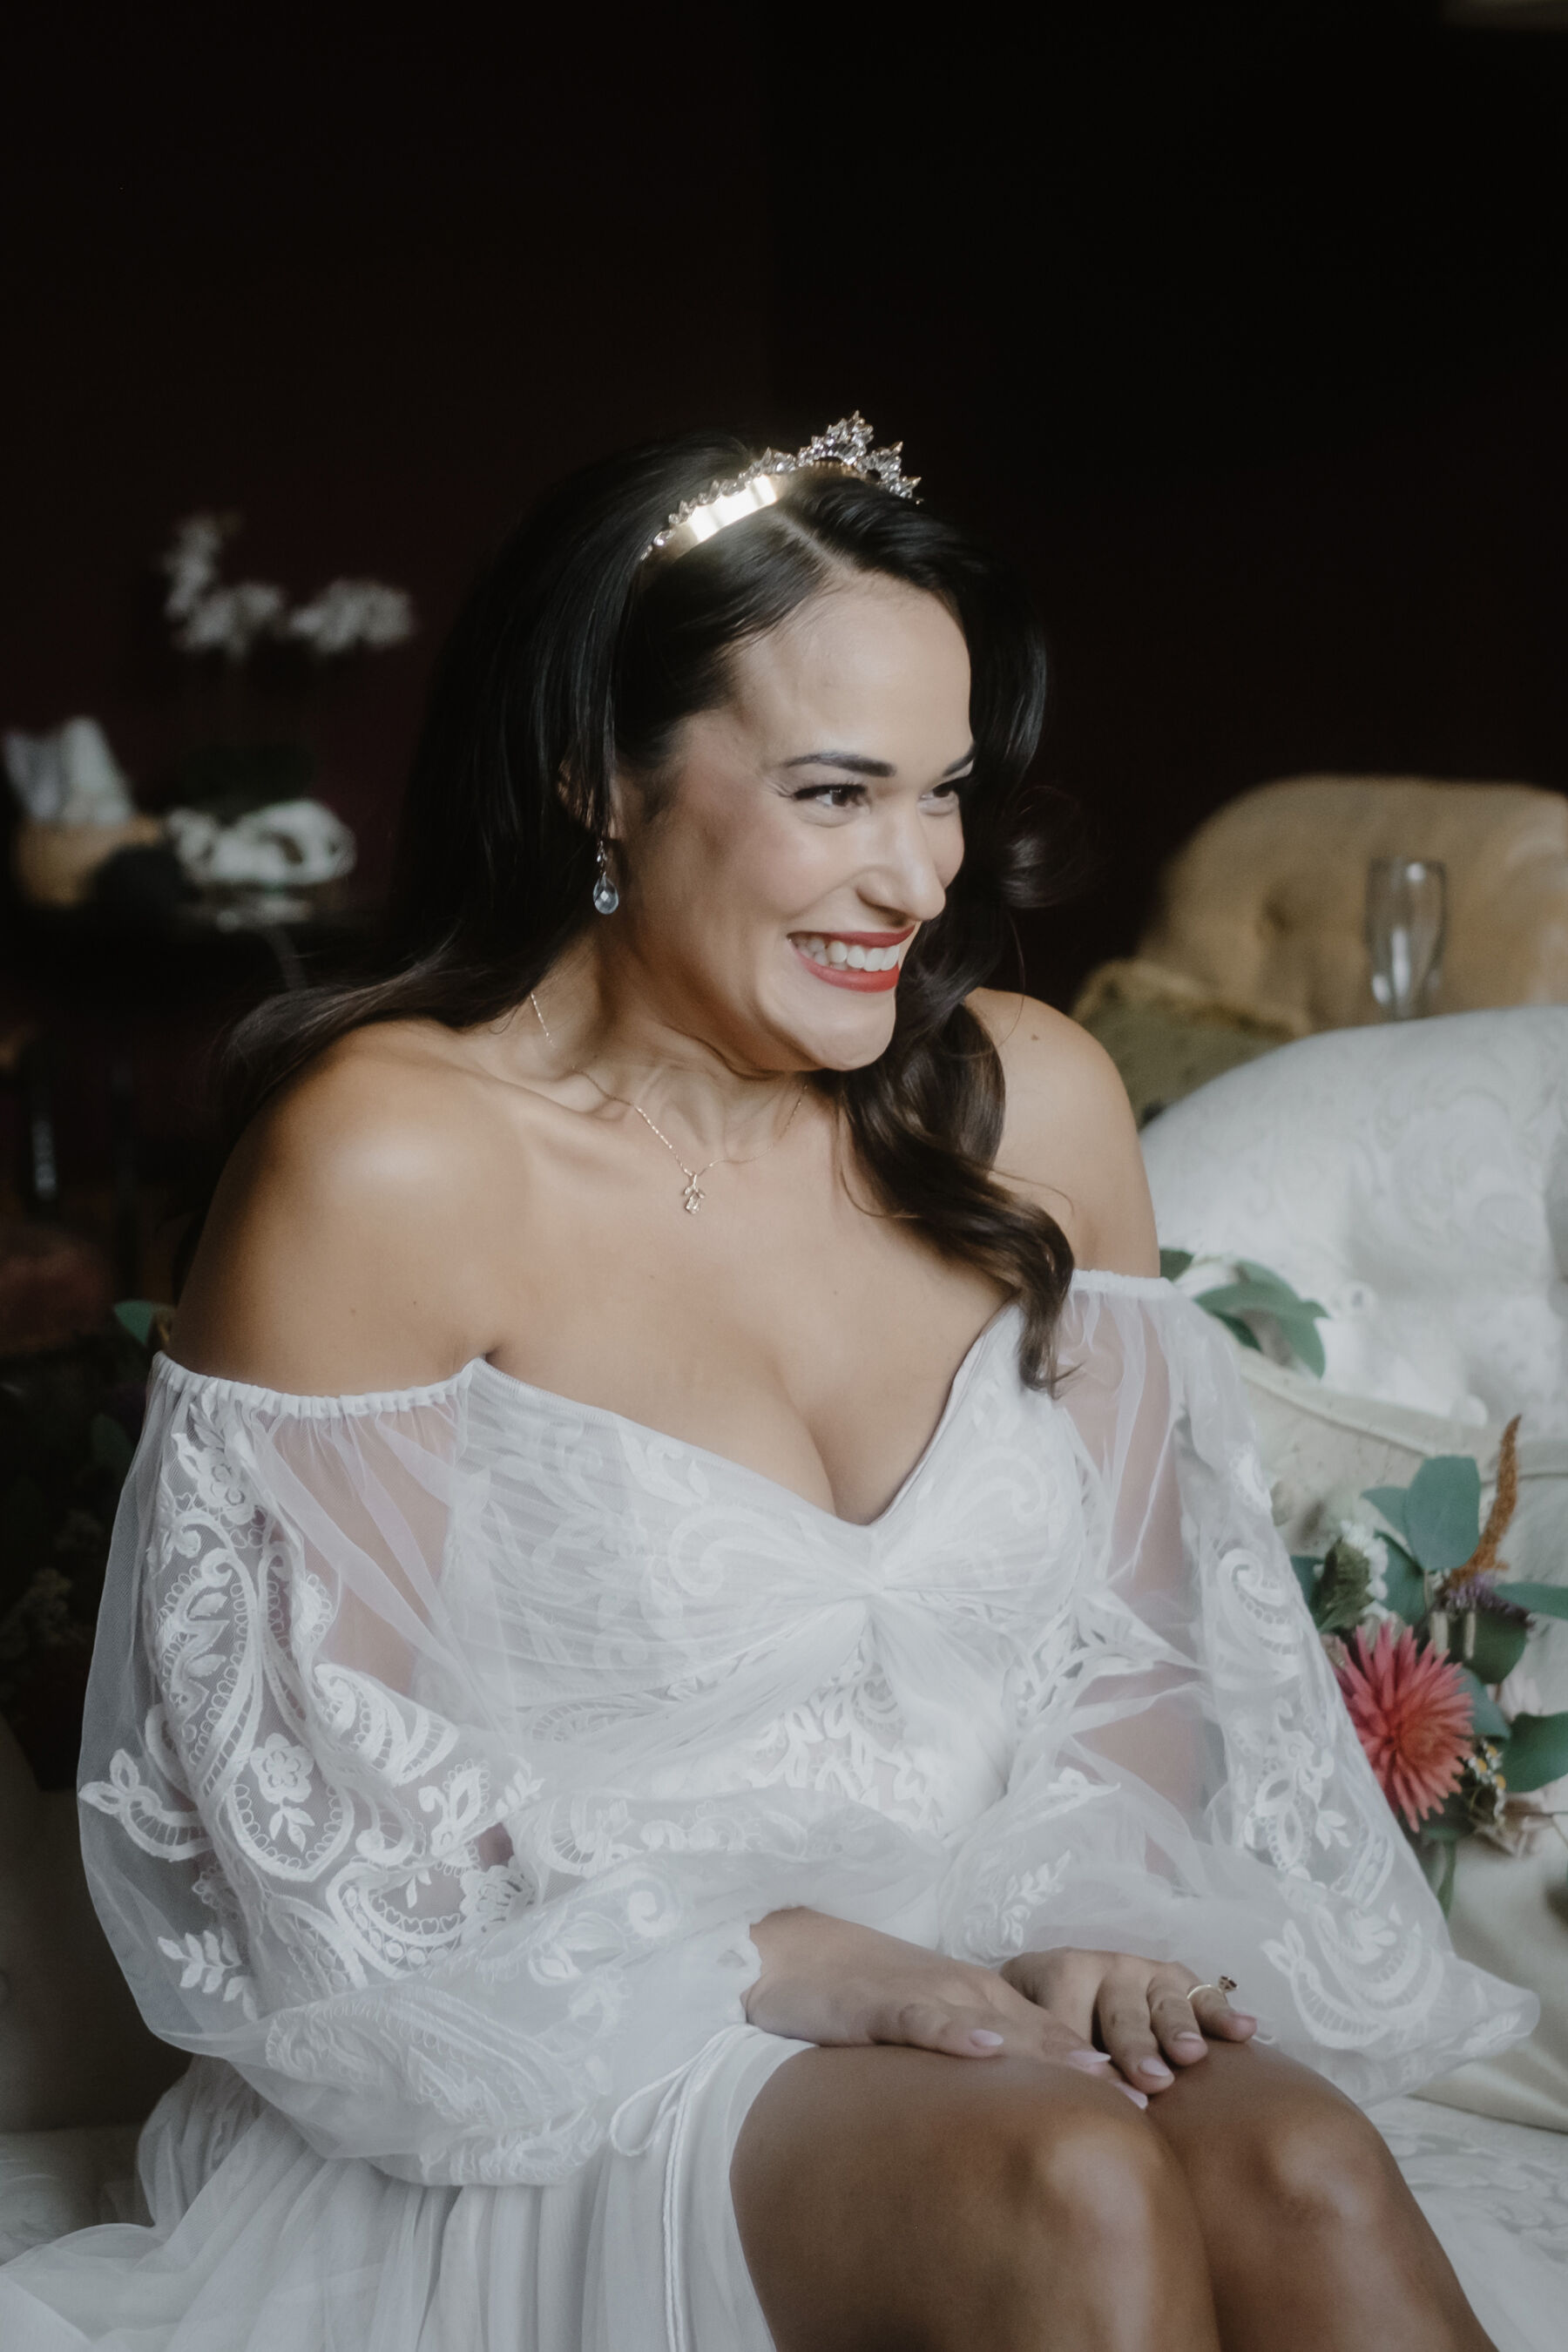 Smiling happy bride wearing a Lelet bridal headpiece & off the shoulder bohemian inspired wedding dress by Willowby by Watters.